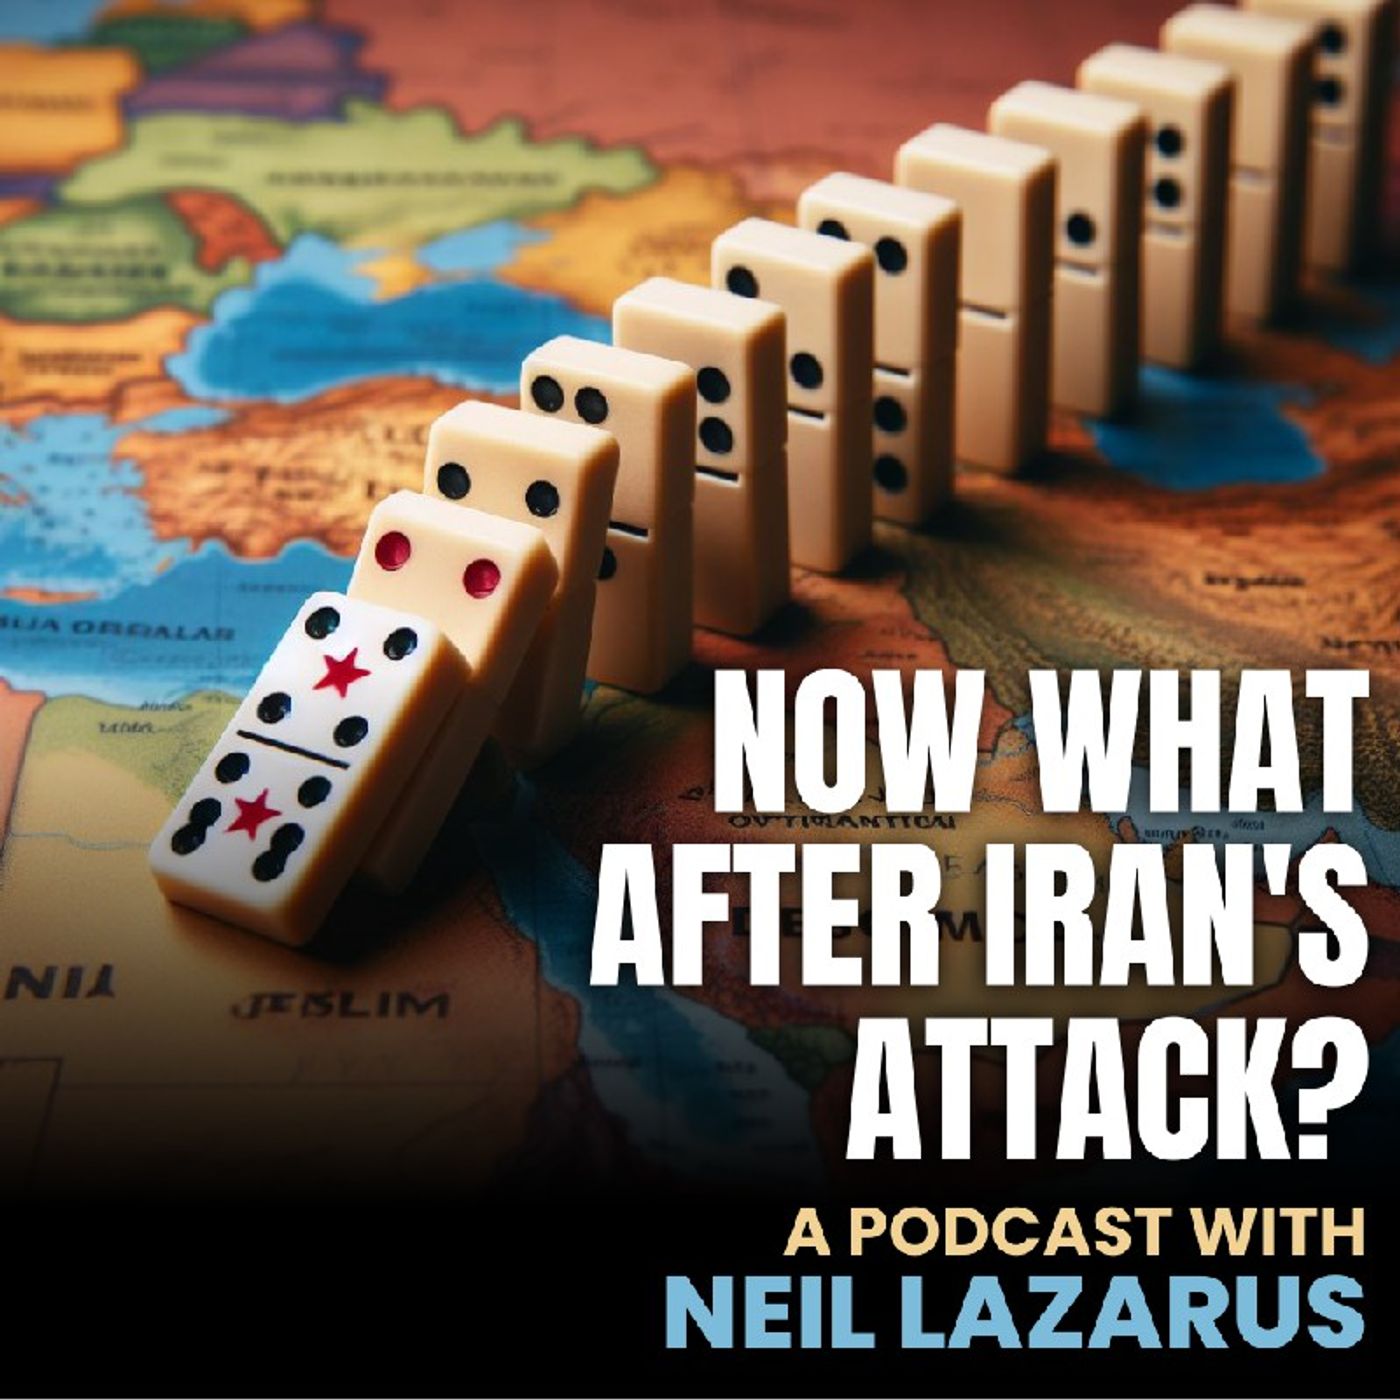 Israel and Iran. On the brink of total war?